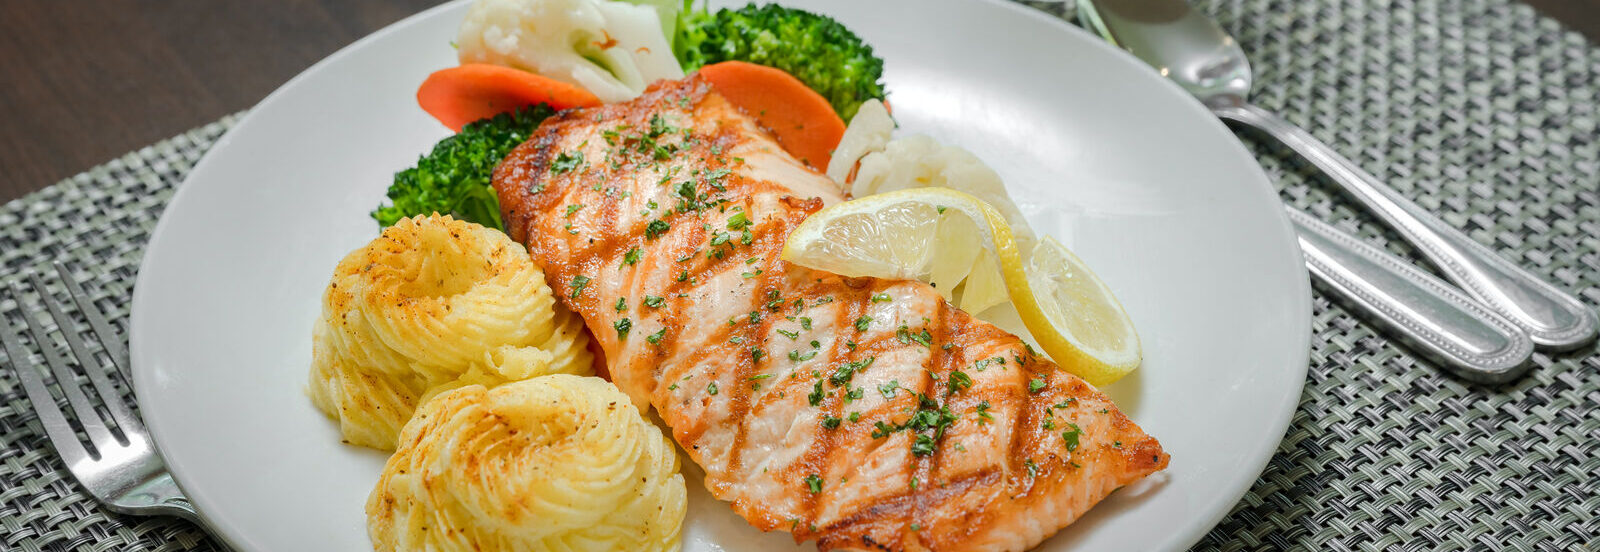 grilled salmon steak with lemon slice on a plate with mashed potato and steamed vegetables